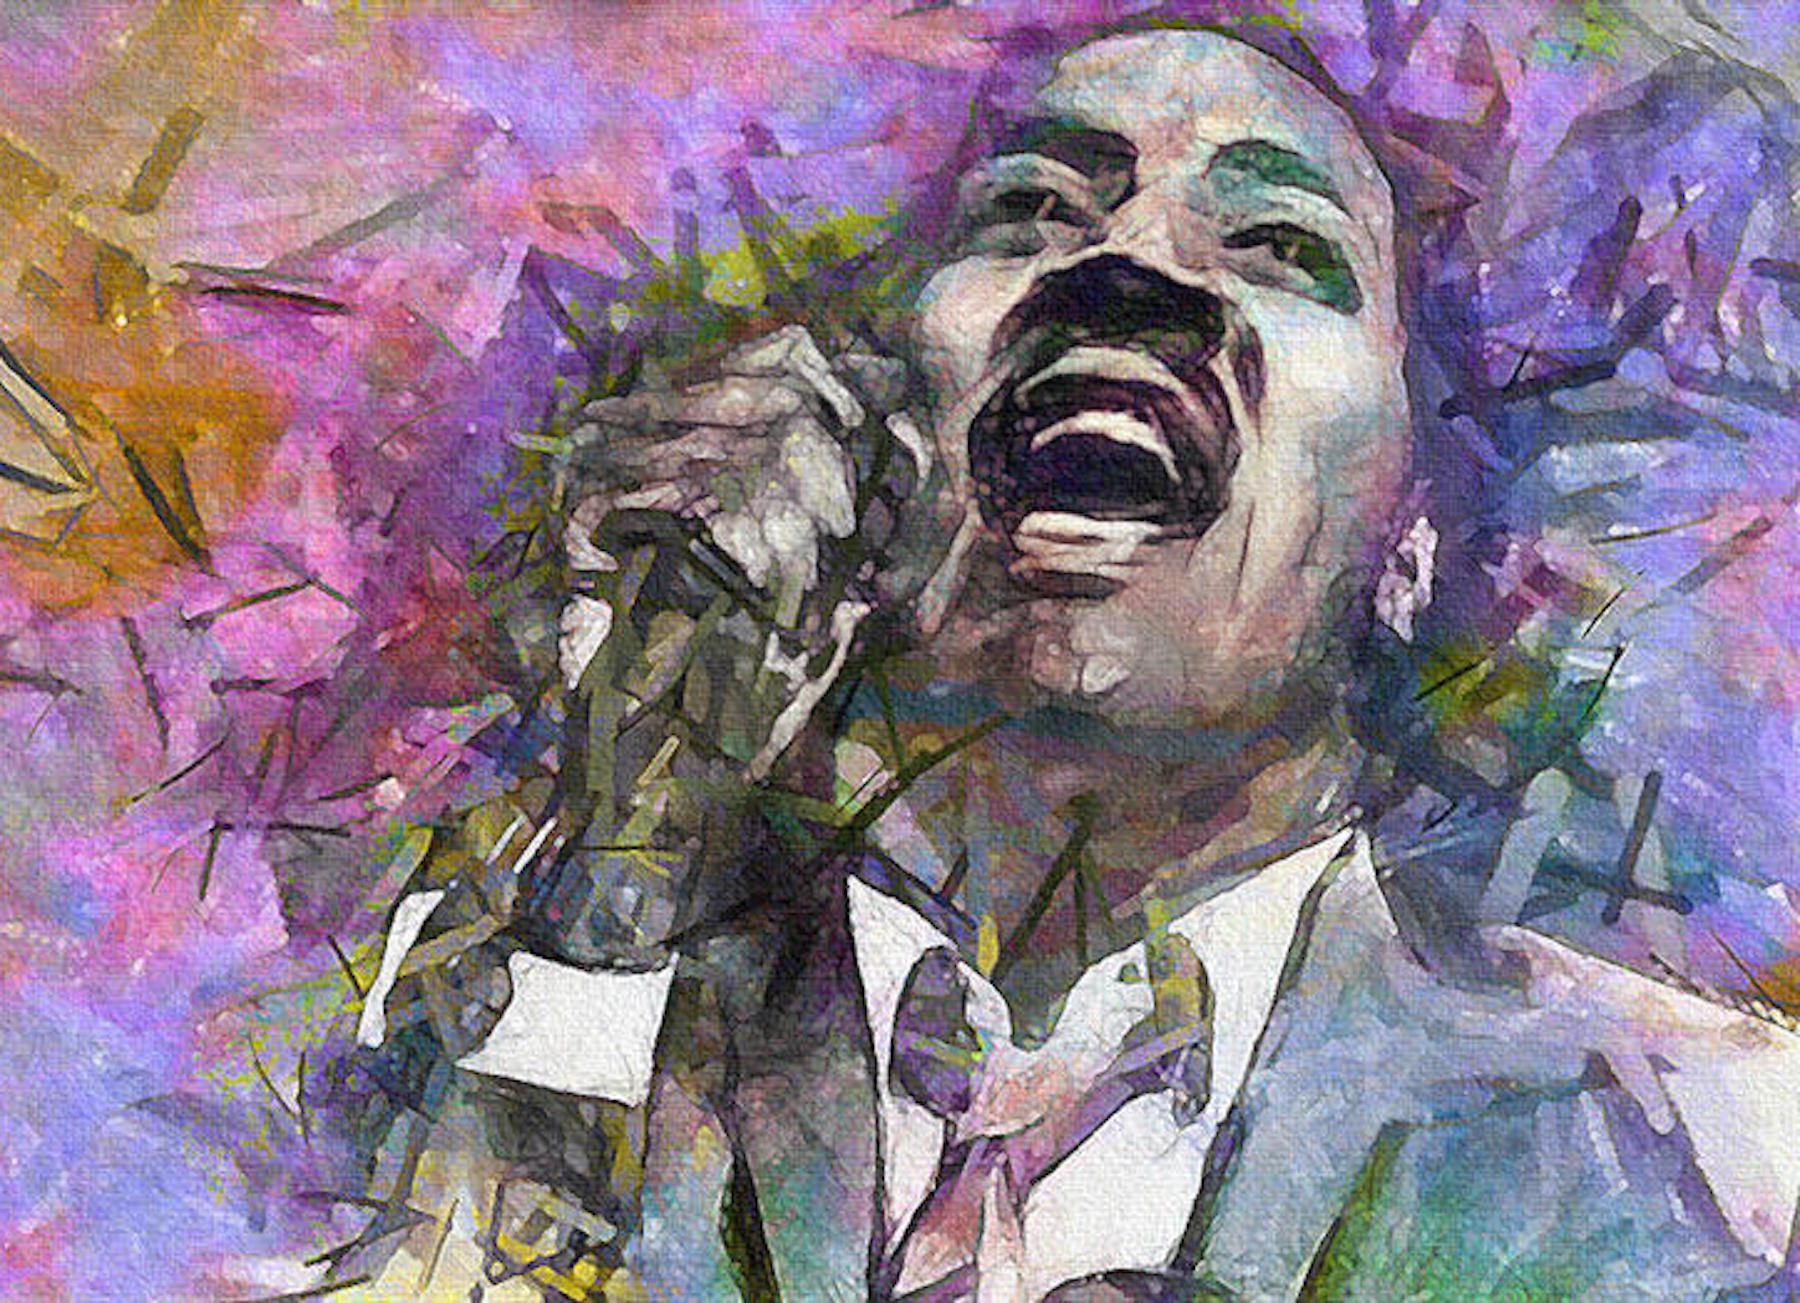 Otis Redding, one of America's greatest R&B and soul singers, holding a microphone against abstract watercolor background.